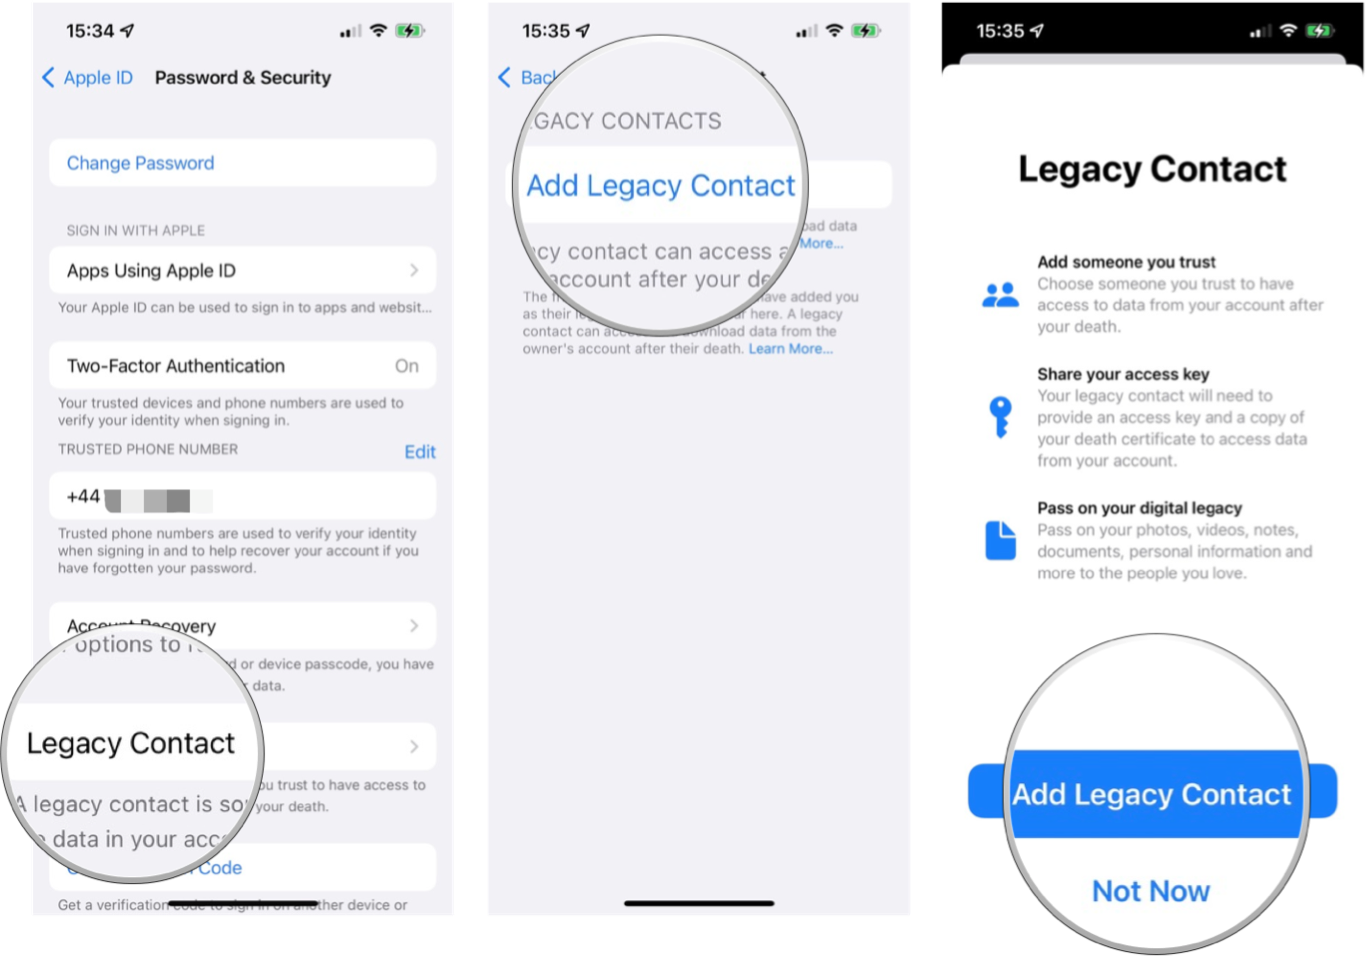 How to add a Legacy Contact on iPhone or iPad: Tap Legacy Contact, tap Add Legacy Contact, and confirm by tapping Add Legacy Contact once more